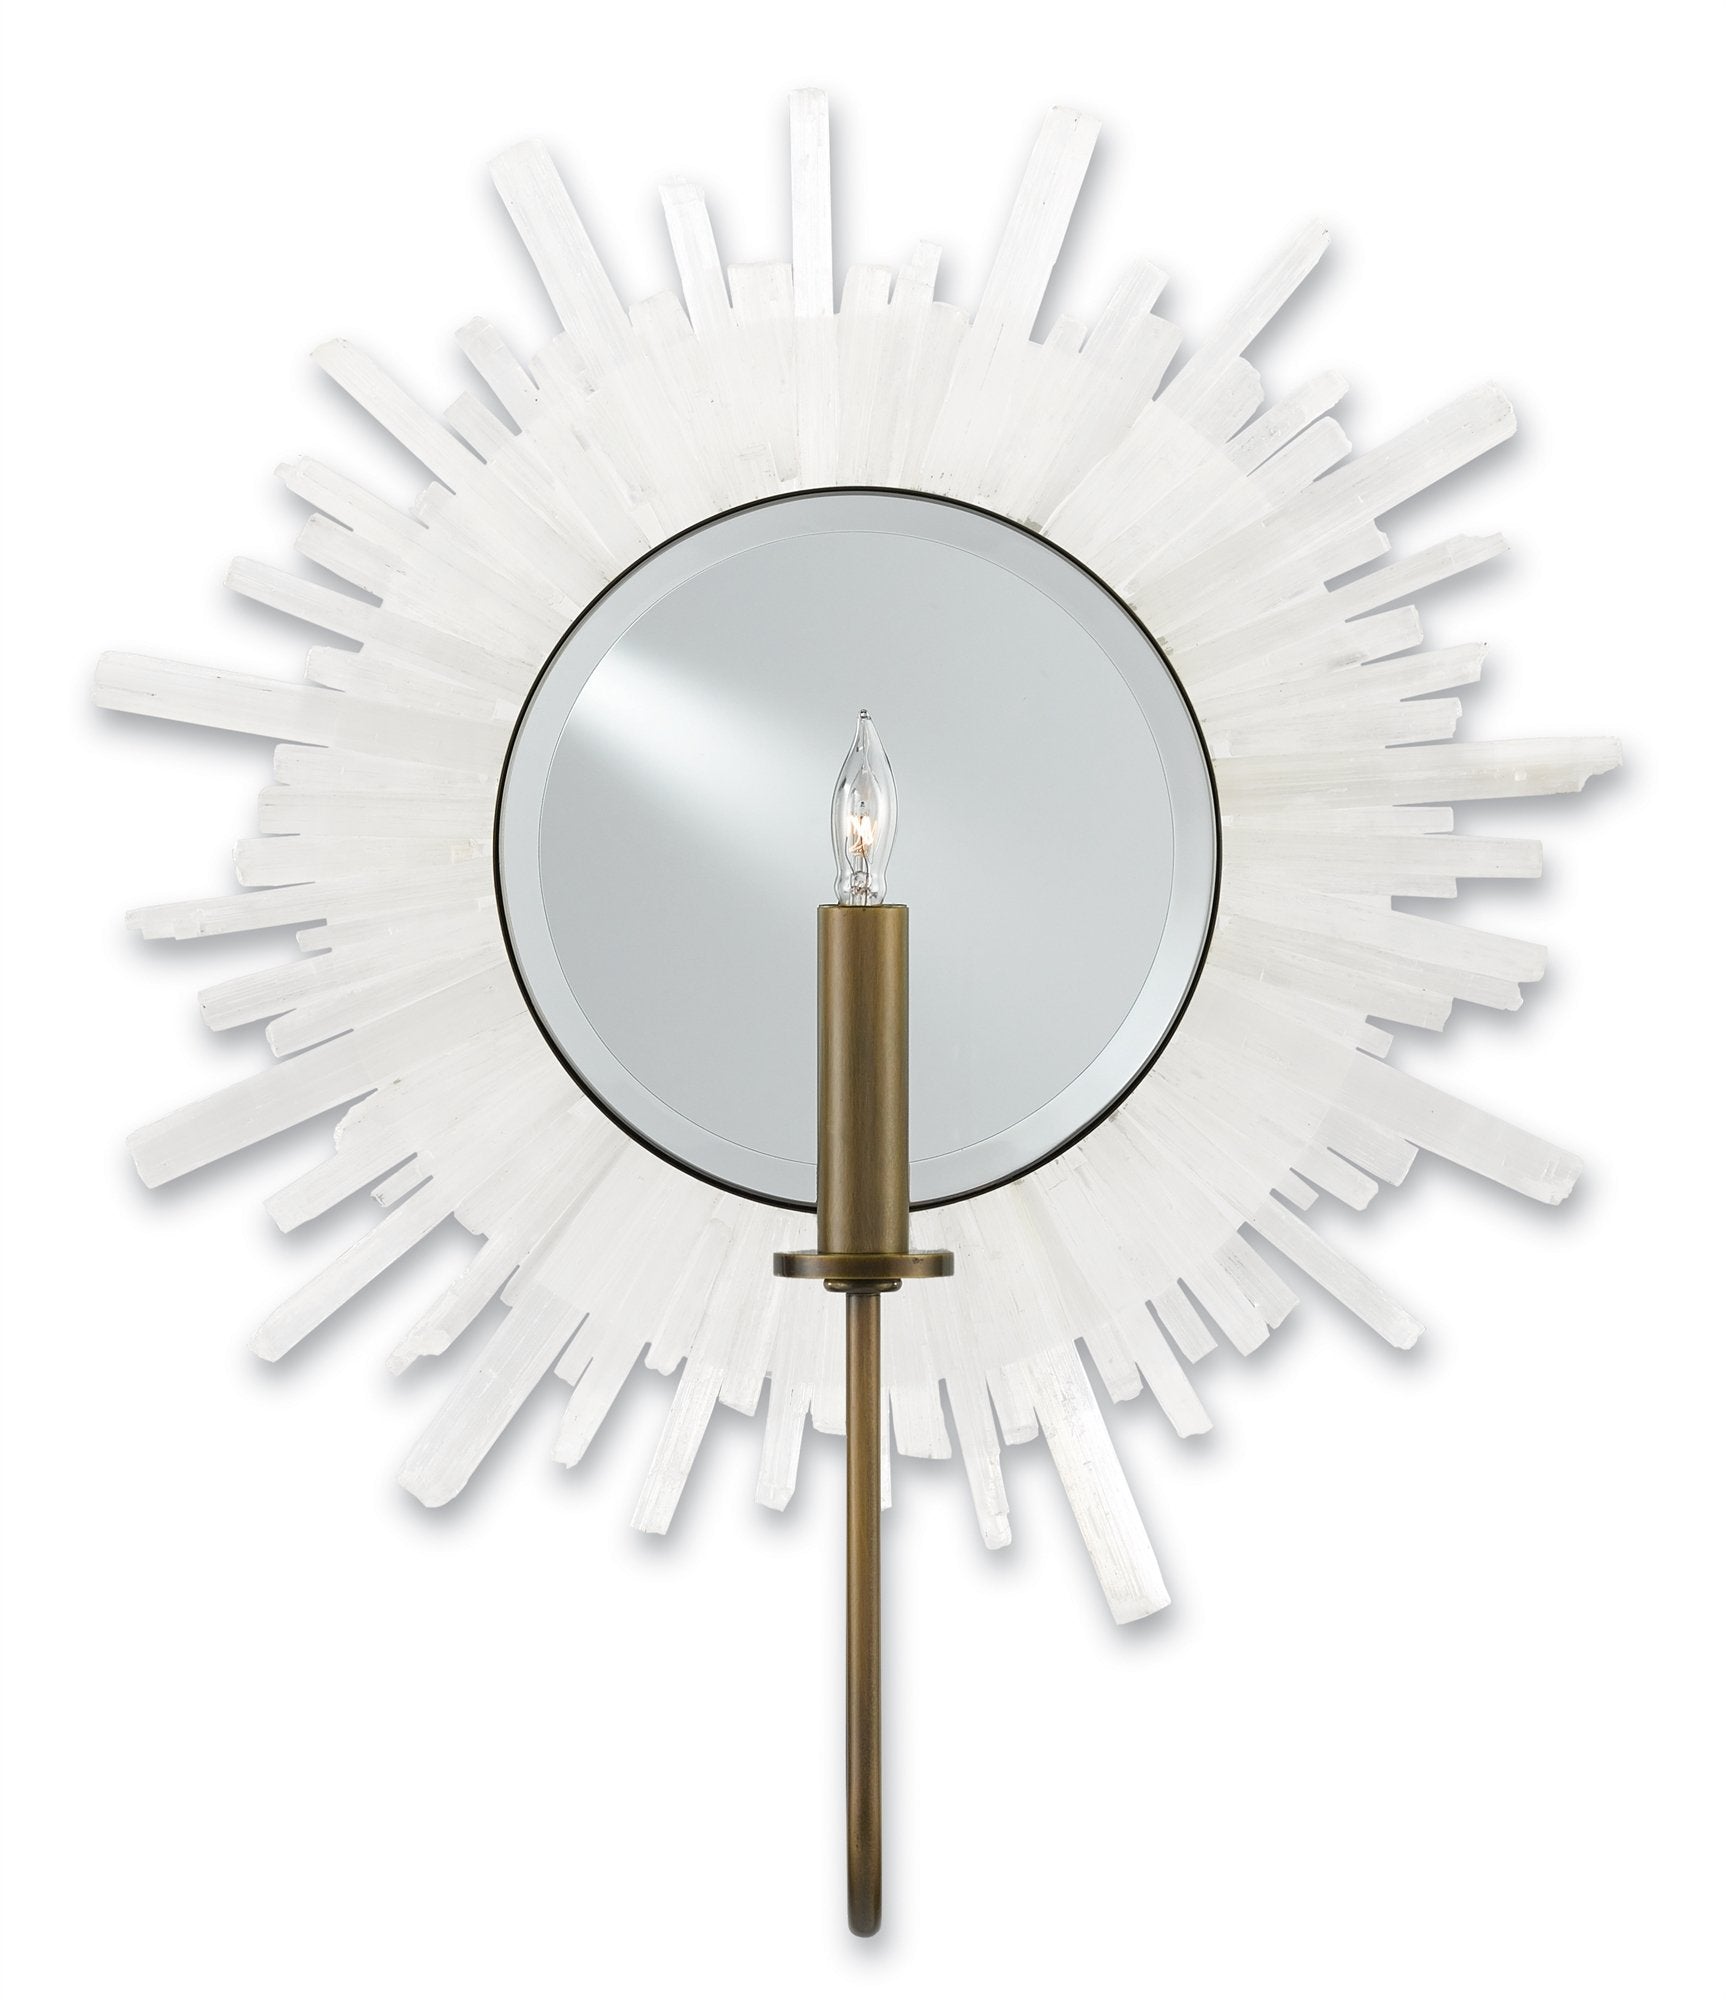 Halo Wall Sconce design by Currey and Company